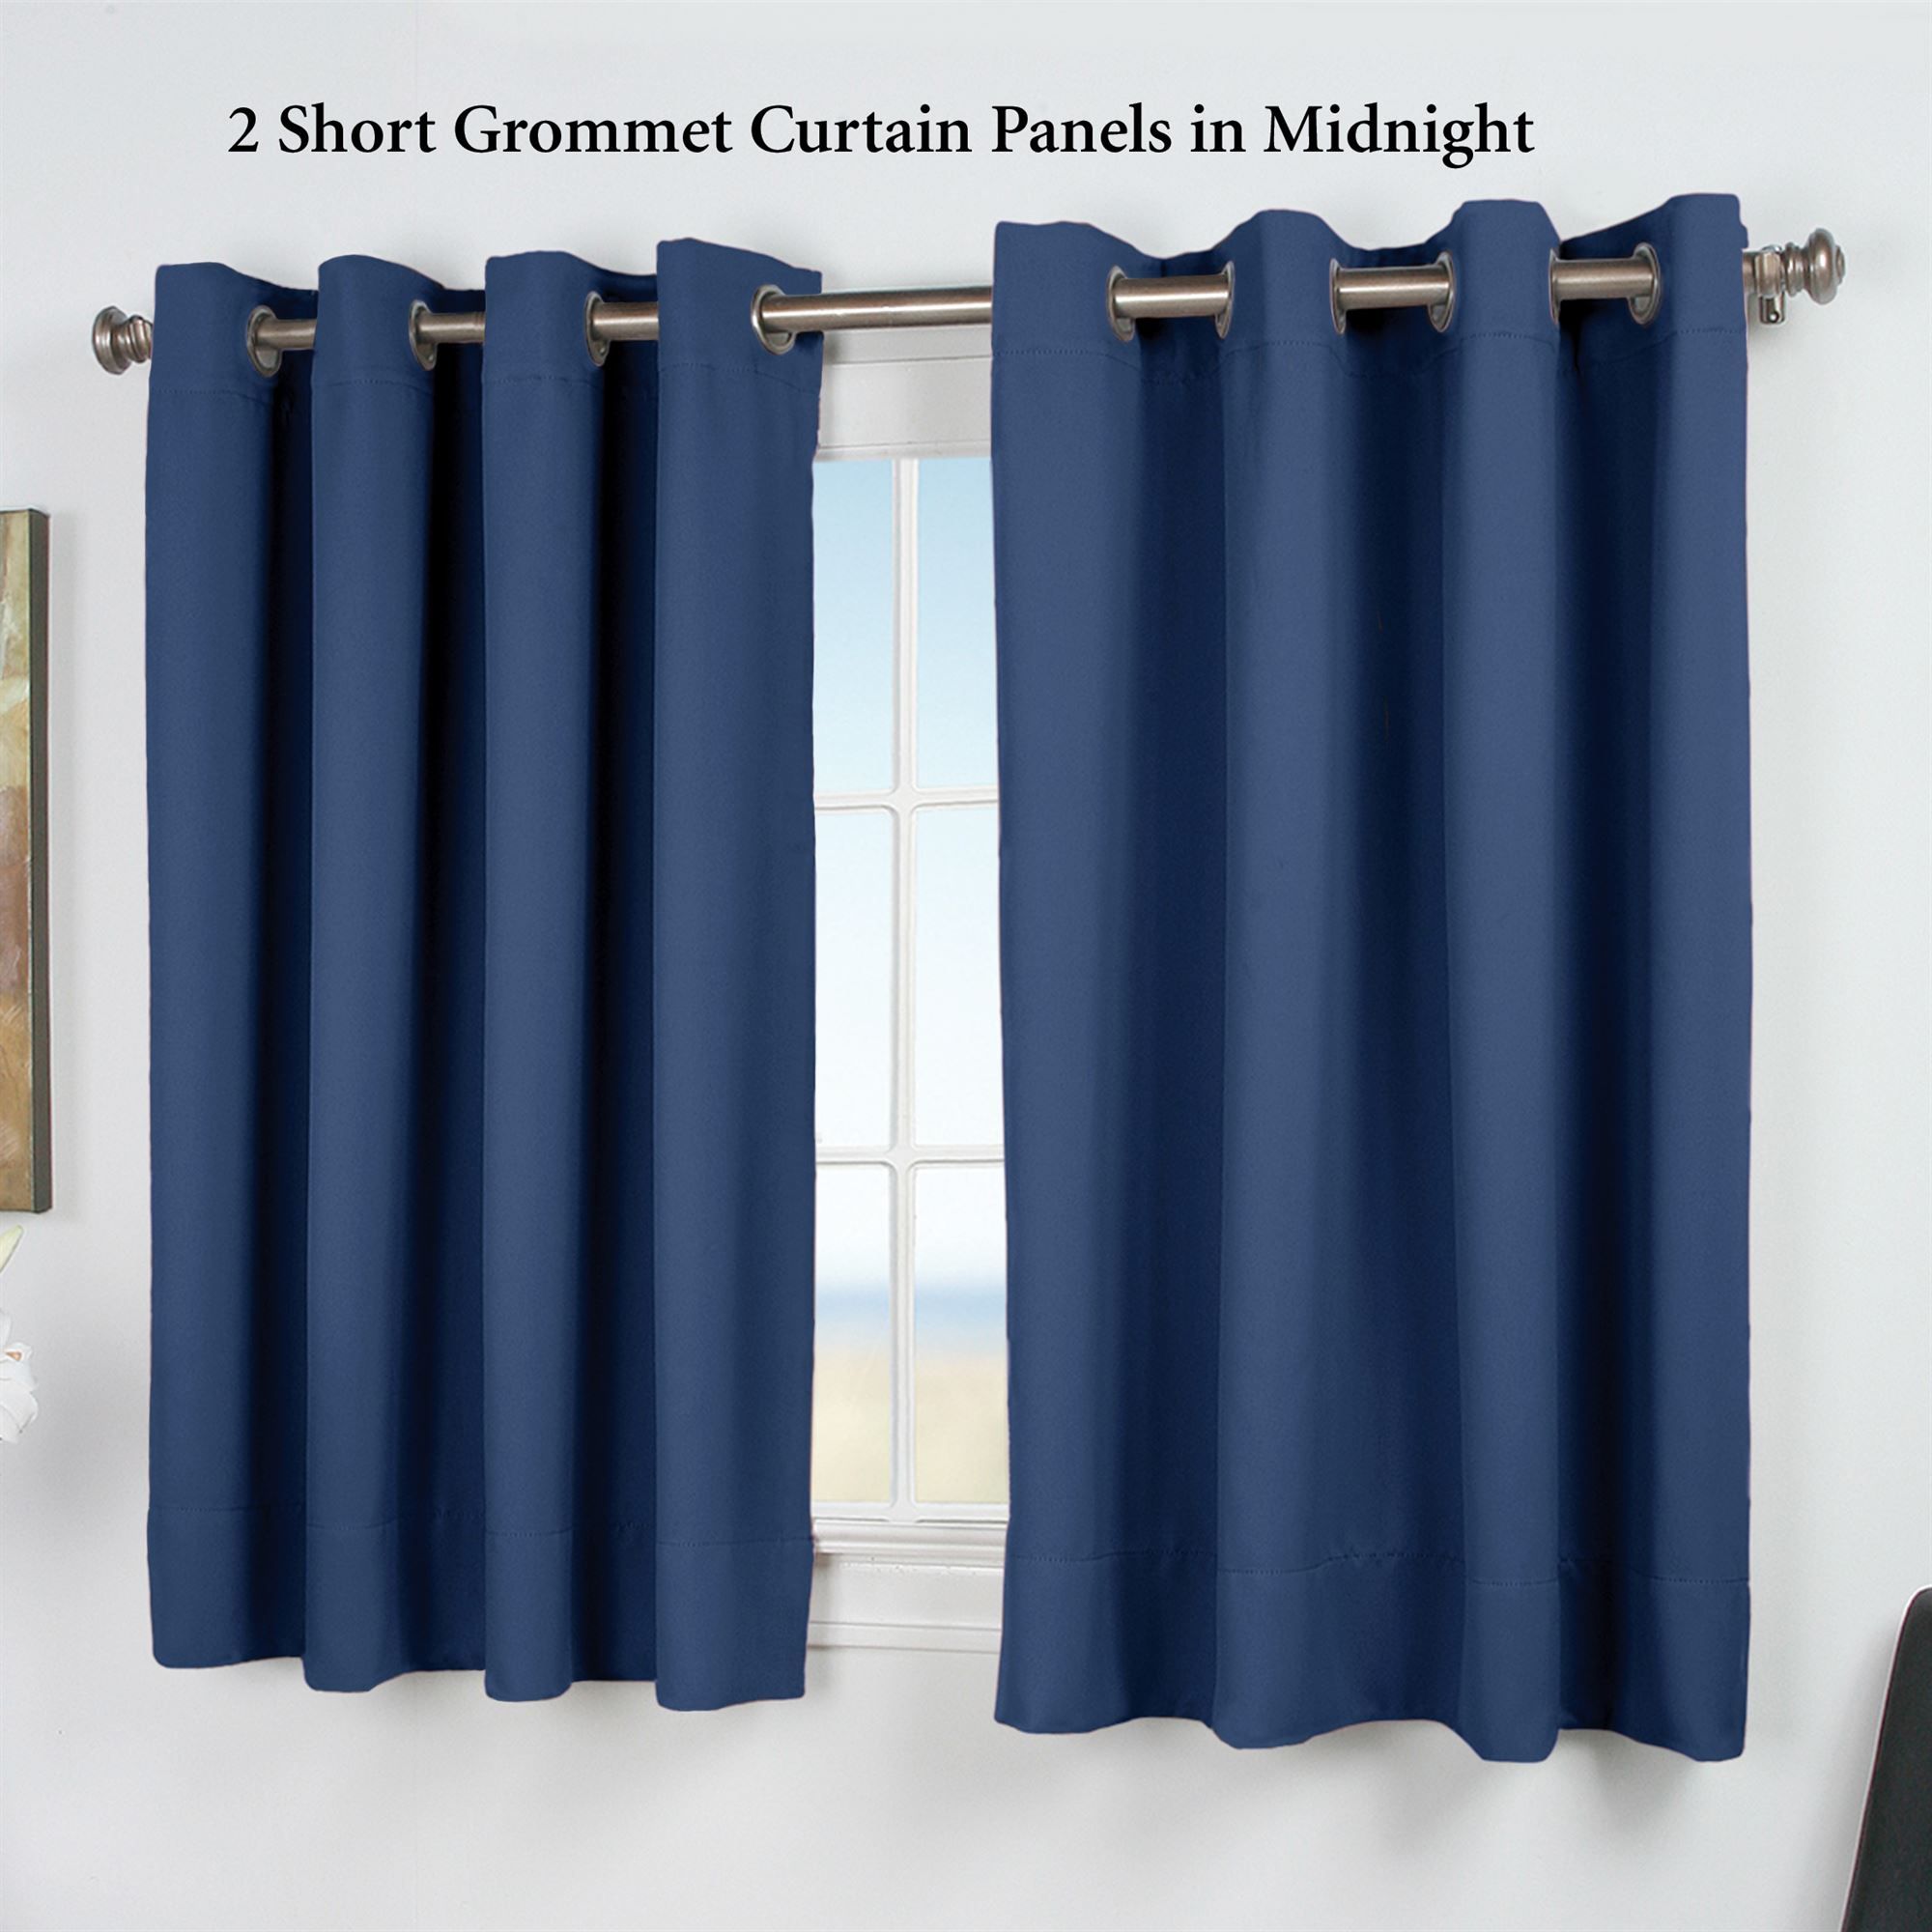 Ultimate Blackout Short Grommet Curtain Panel Intended For Ultimate Blackout Short Length Grommet Curtain Panels (View 3 of 30)